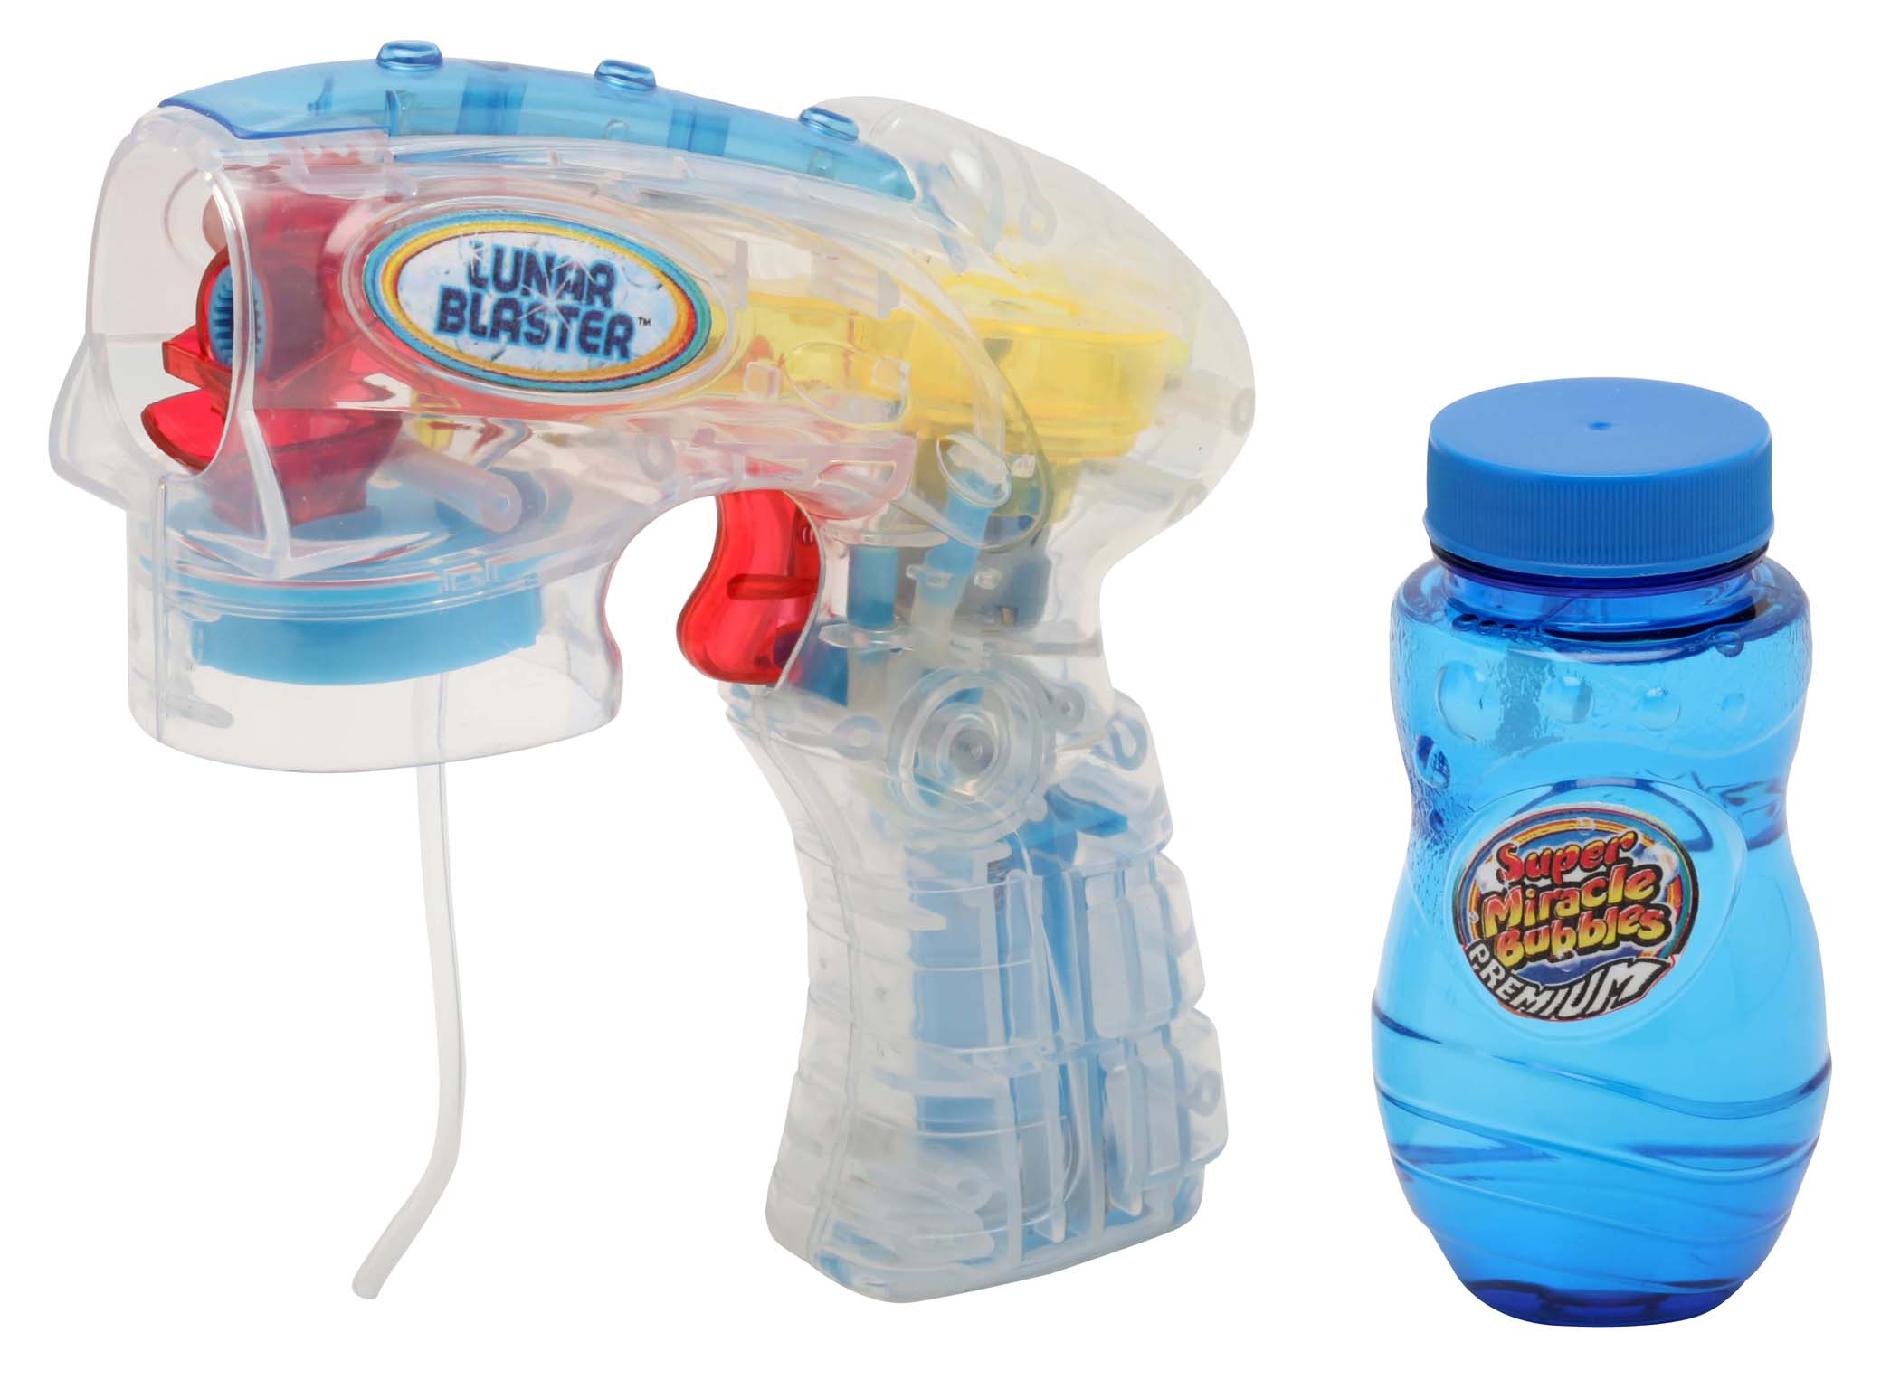 UPC 076666209996 product image for Imperial Toy Super Miracle Bubbles Lunar Light-Up Bubble Blaster | upcitemdb.com